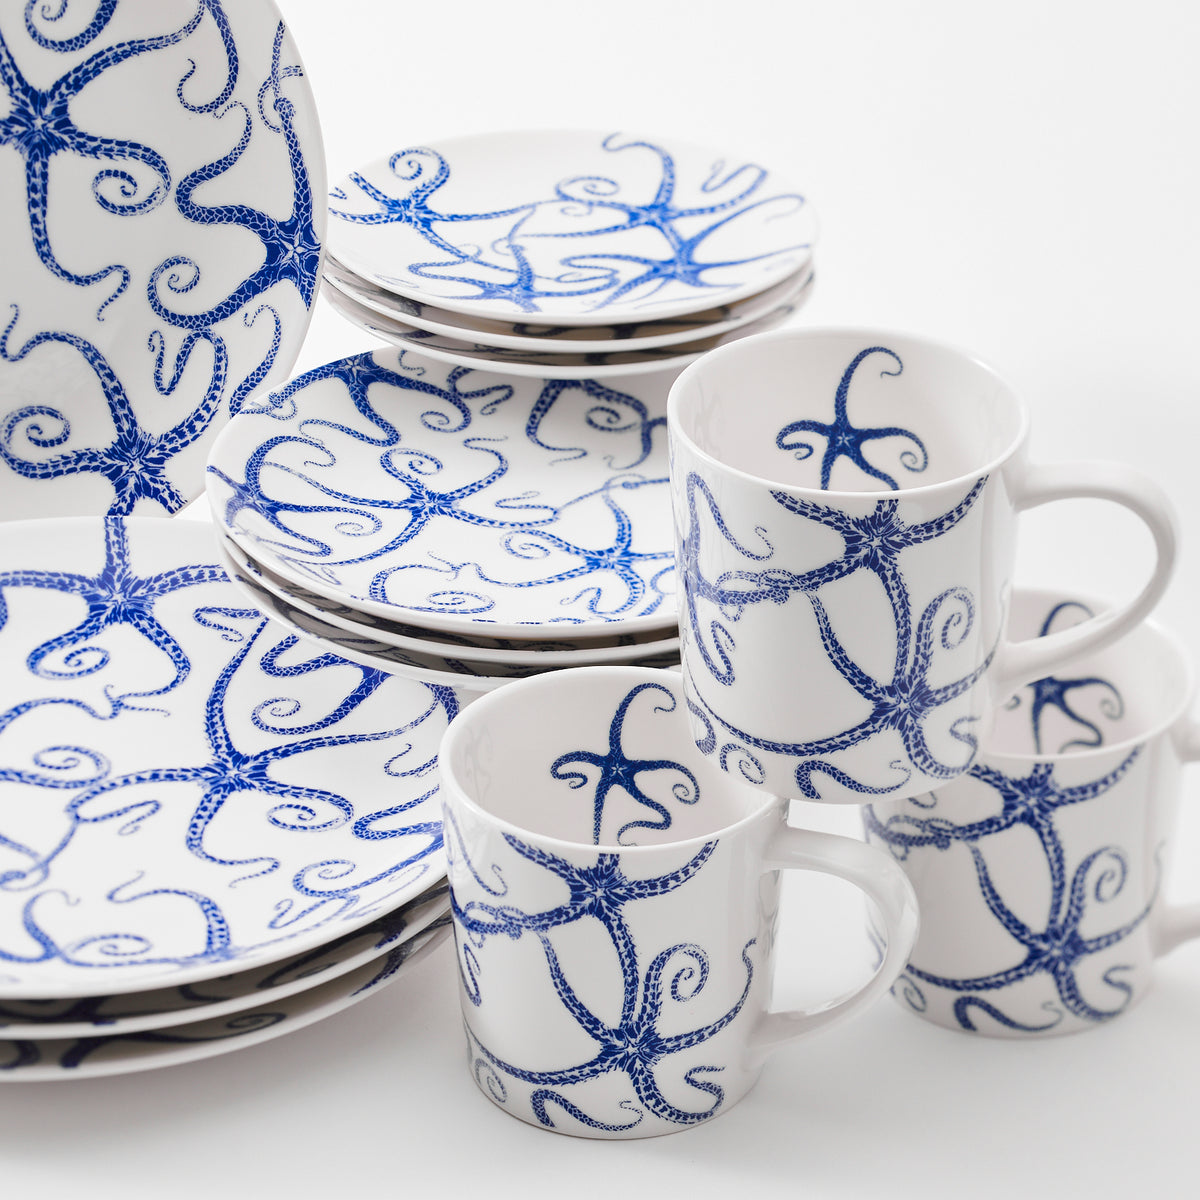 A set of Caskata Artisanal Home Starfish Coupe Dinner Plates and mugs, adorned with blue octopus patterns, arranged in a stack on a white background. Their contemporary shape adds an elegant touch, reminiscent of delicate starfish gracing a coastal tableau.